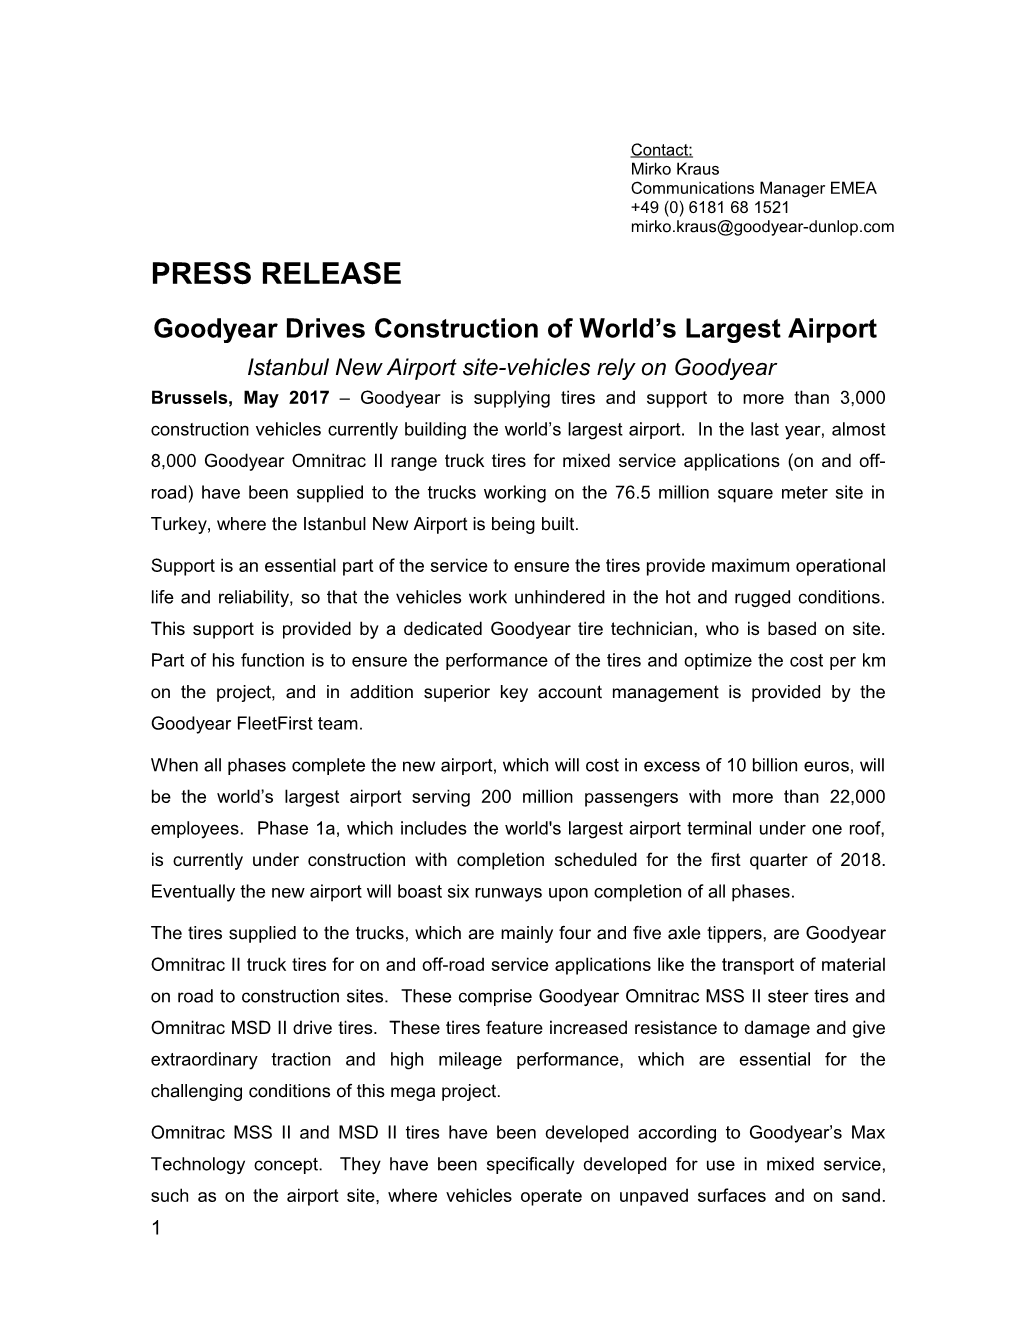 Goodyear Drives Construction of World S Largest Airport